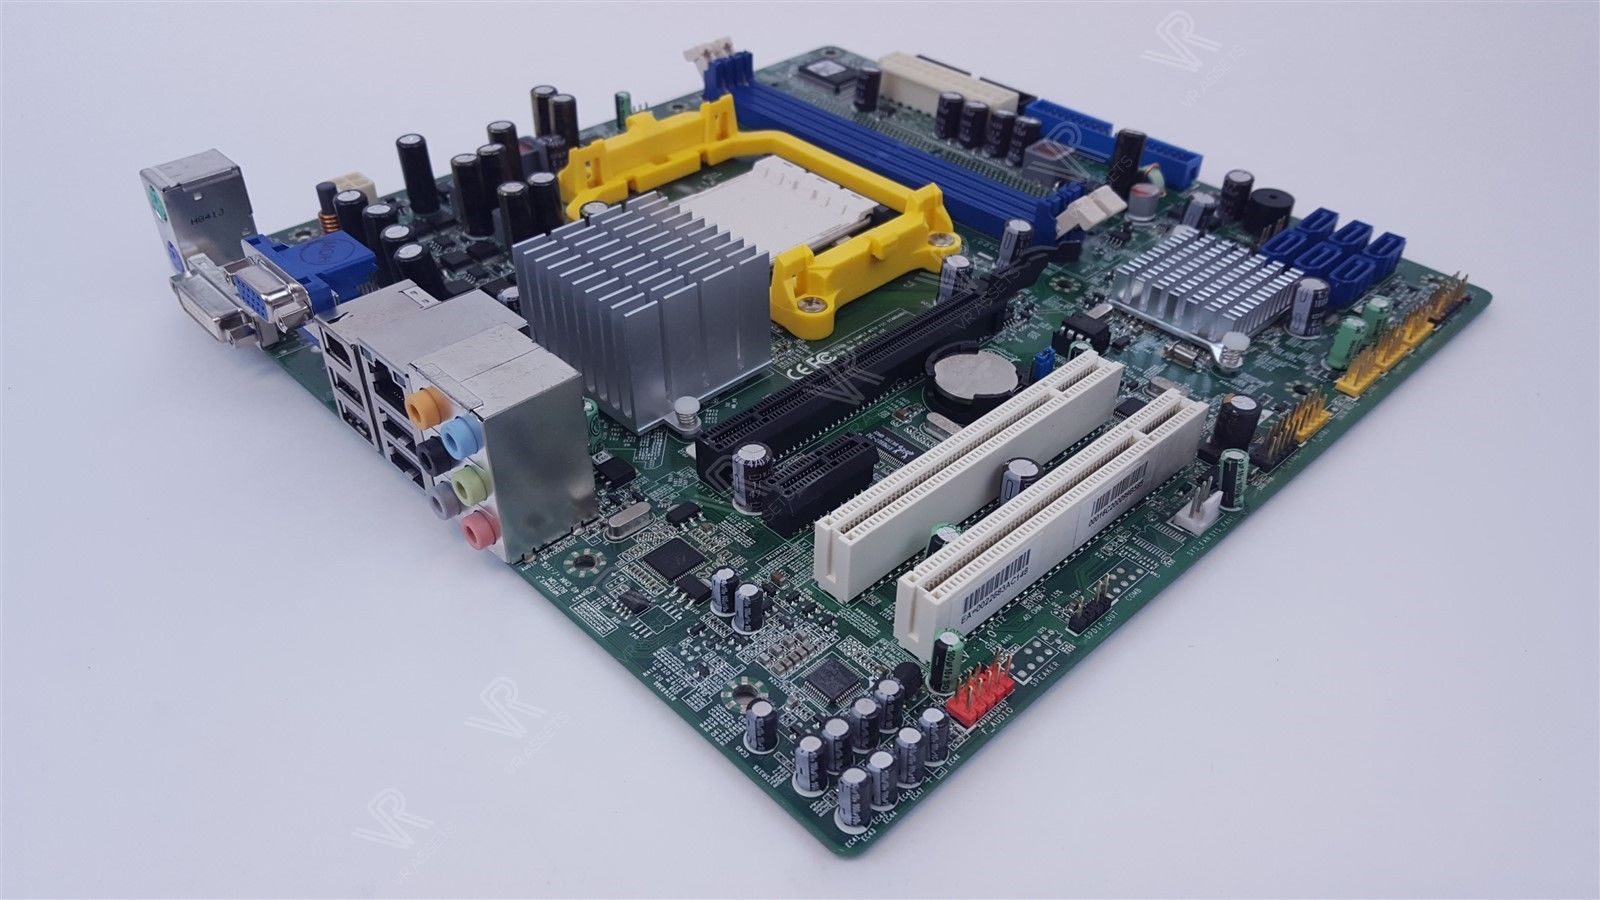 Acer Aspire M1201 M1202 RS740 Motherboard MBSAP09004 MB.SAP09.004 RS740M03A1